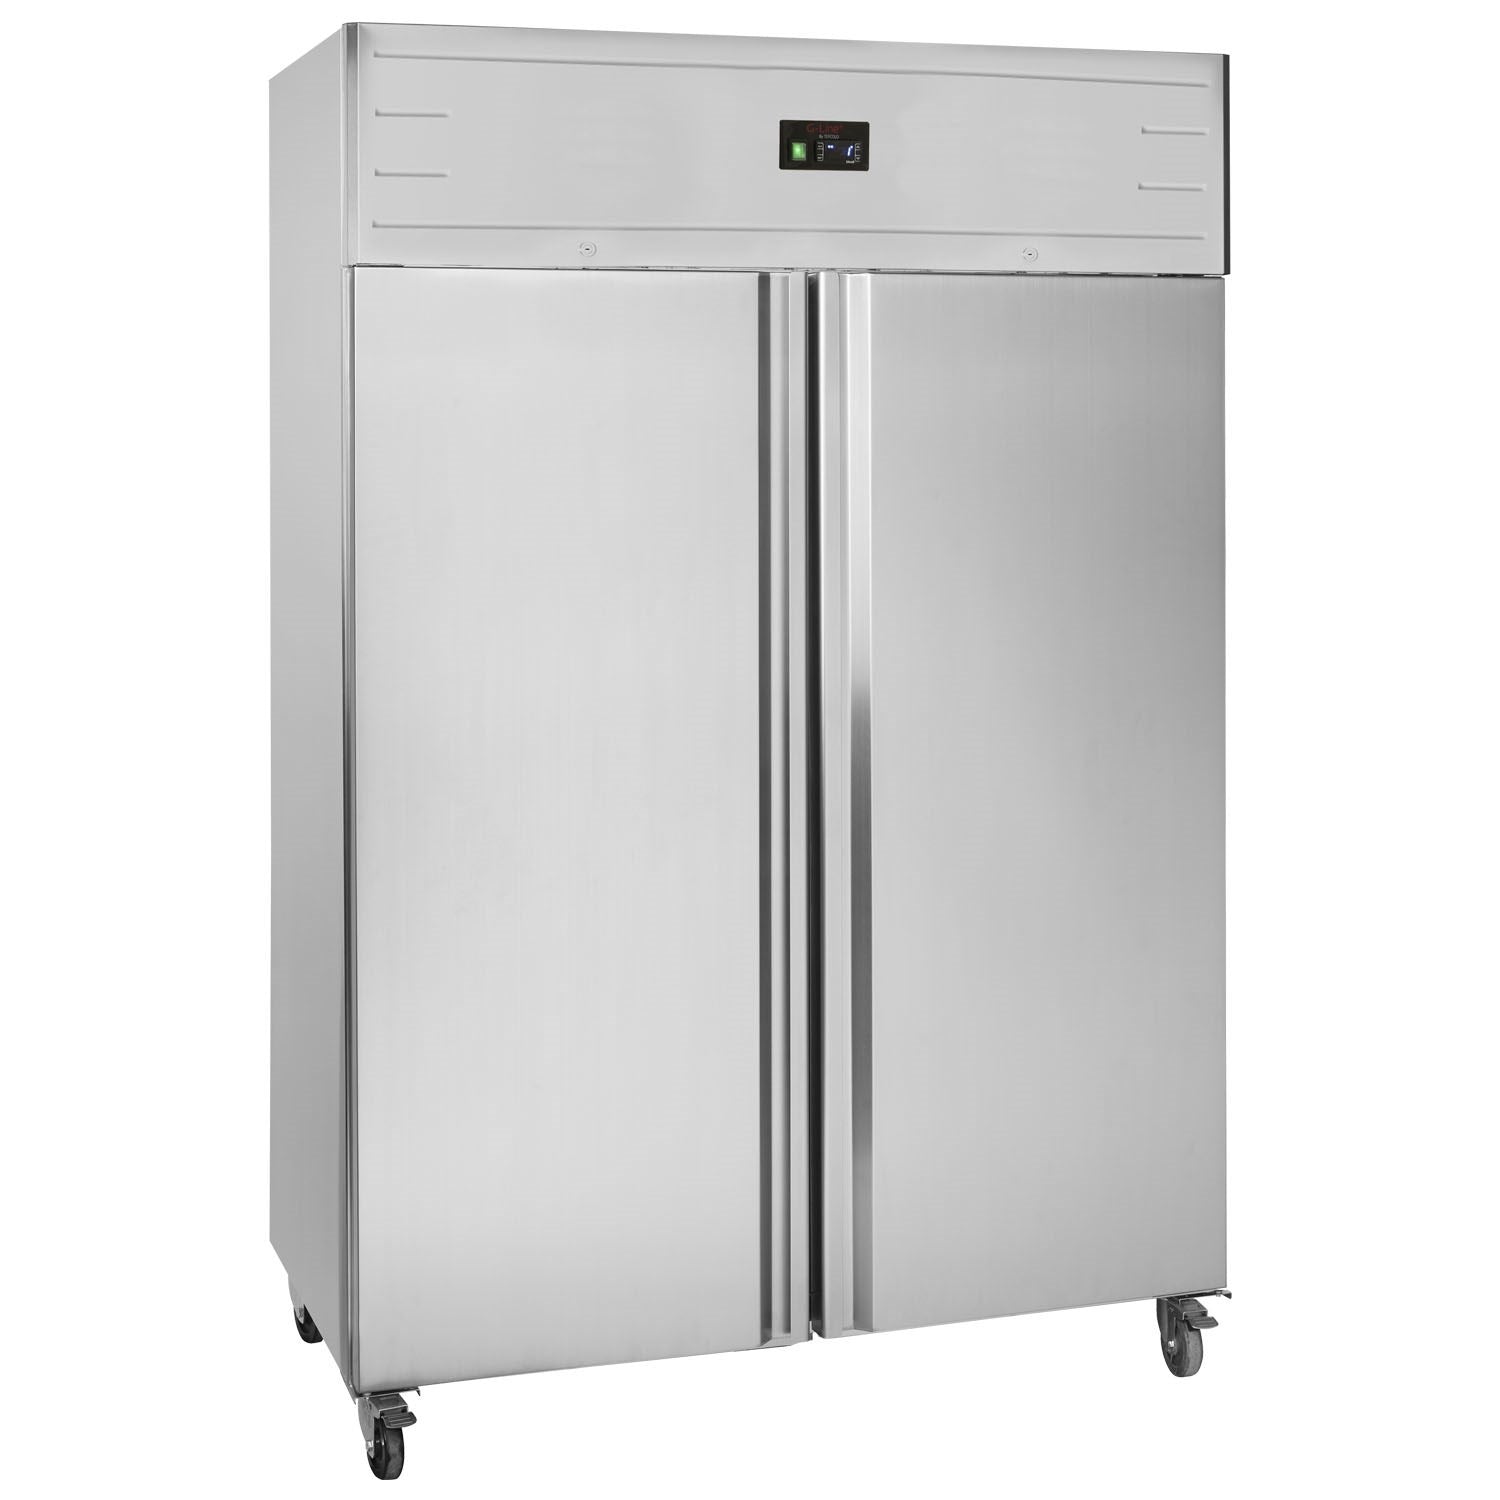 TEFCOLD GUC140 GASTRONORM SOLID DOOR REFRIGERATOR HX2000 WX1340 DX845 DOUBLE DOOR .Product Ref:00433.MODEL:GUC140-🚚 3-5 Days Delivery